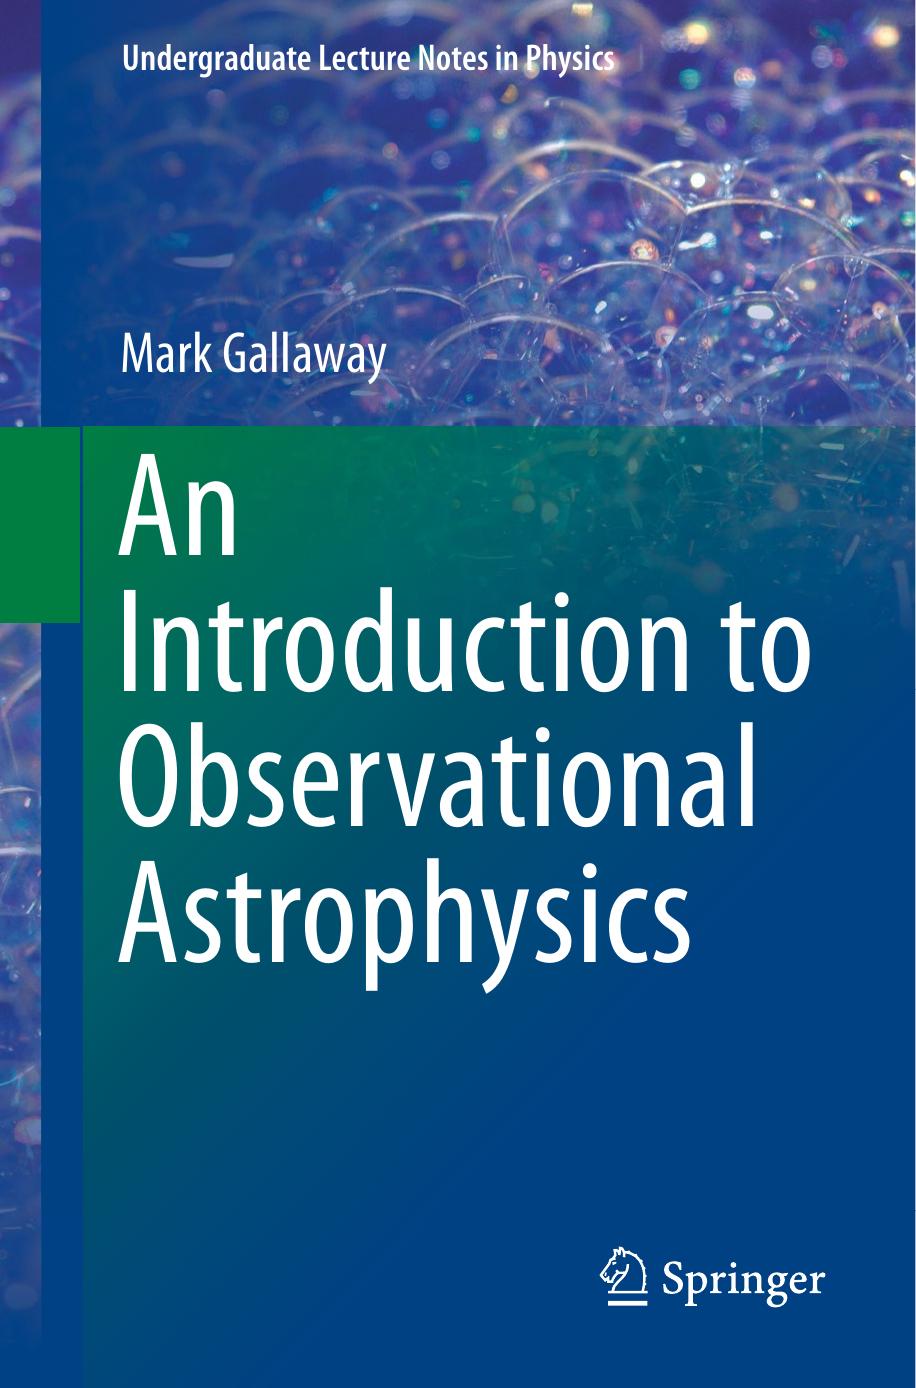 An Introduction to Observational Astrophysics by Mark Gallaway